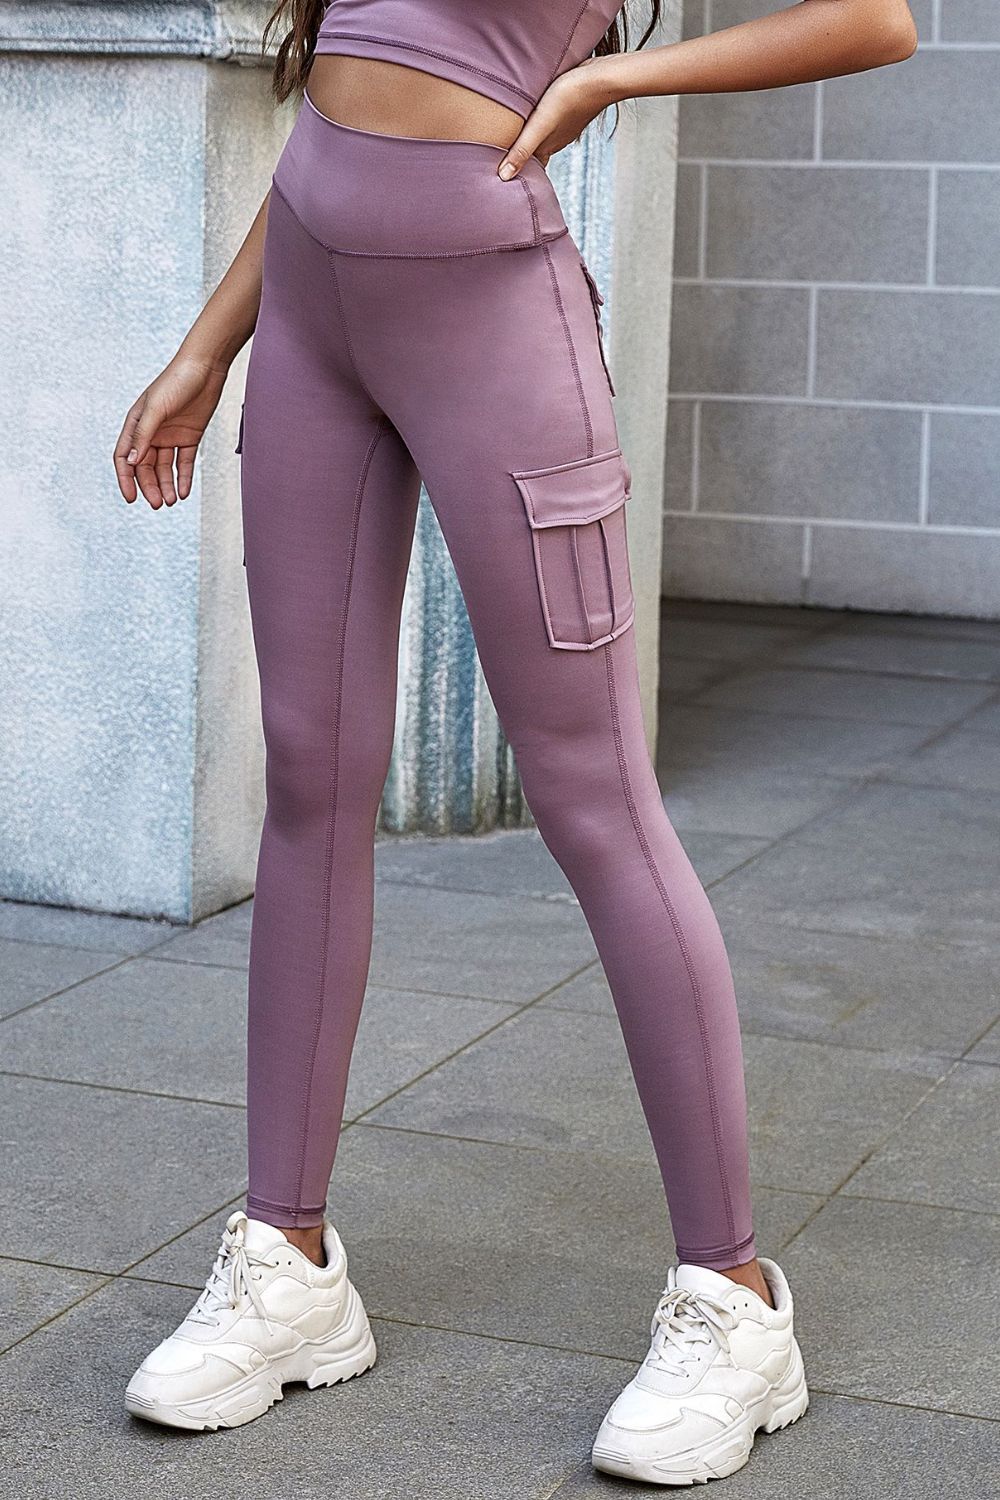 Light Slate Gray The Lost Files High Waist Leggings with Pockets Pants